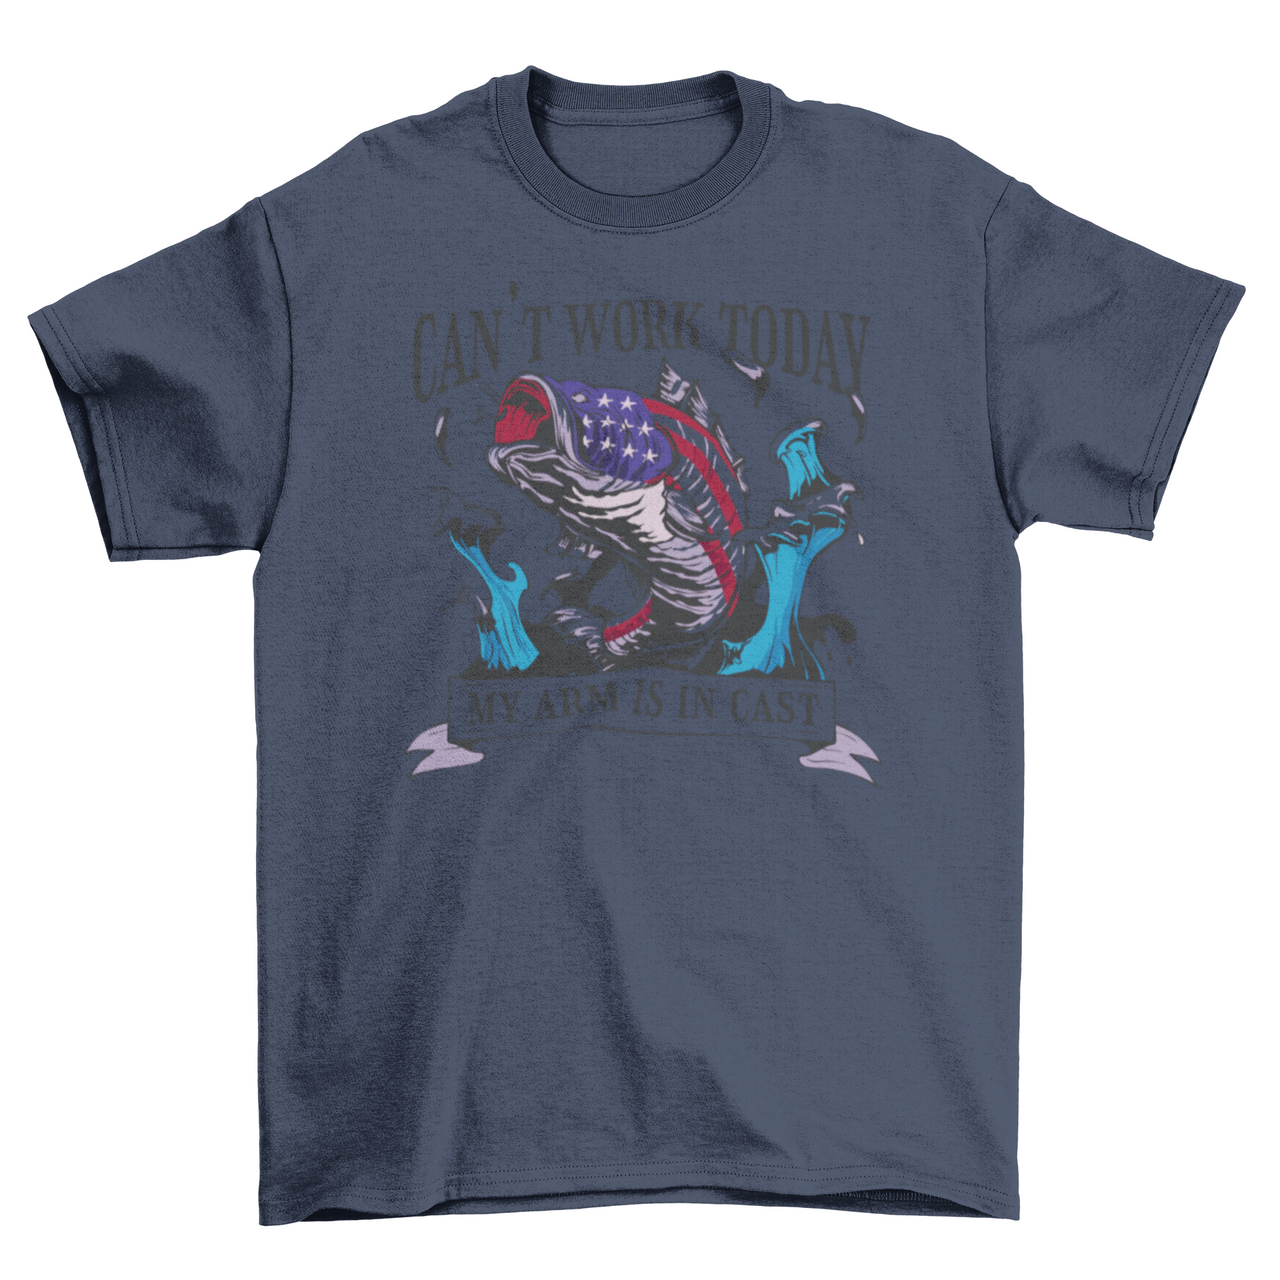 My arm is in a cast fishing t-shirt design - Mercantile Mountain